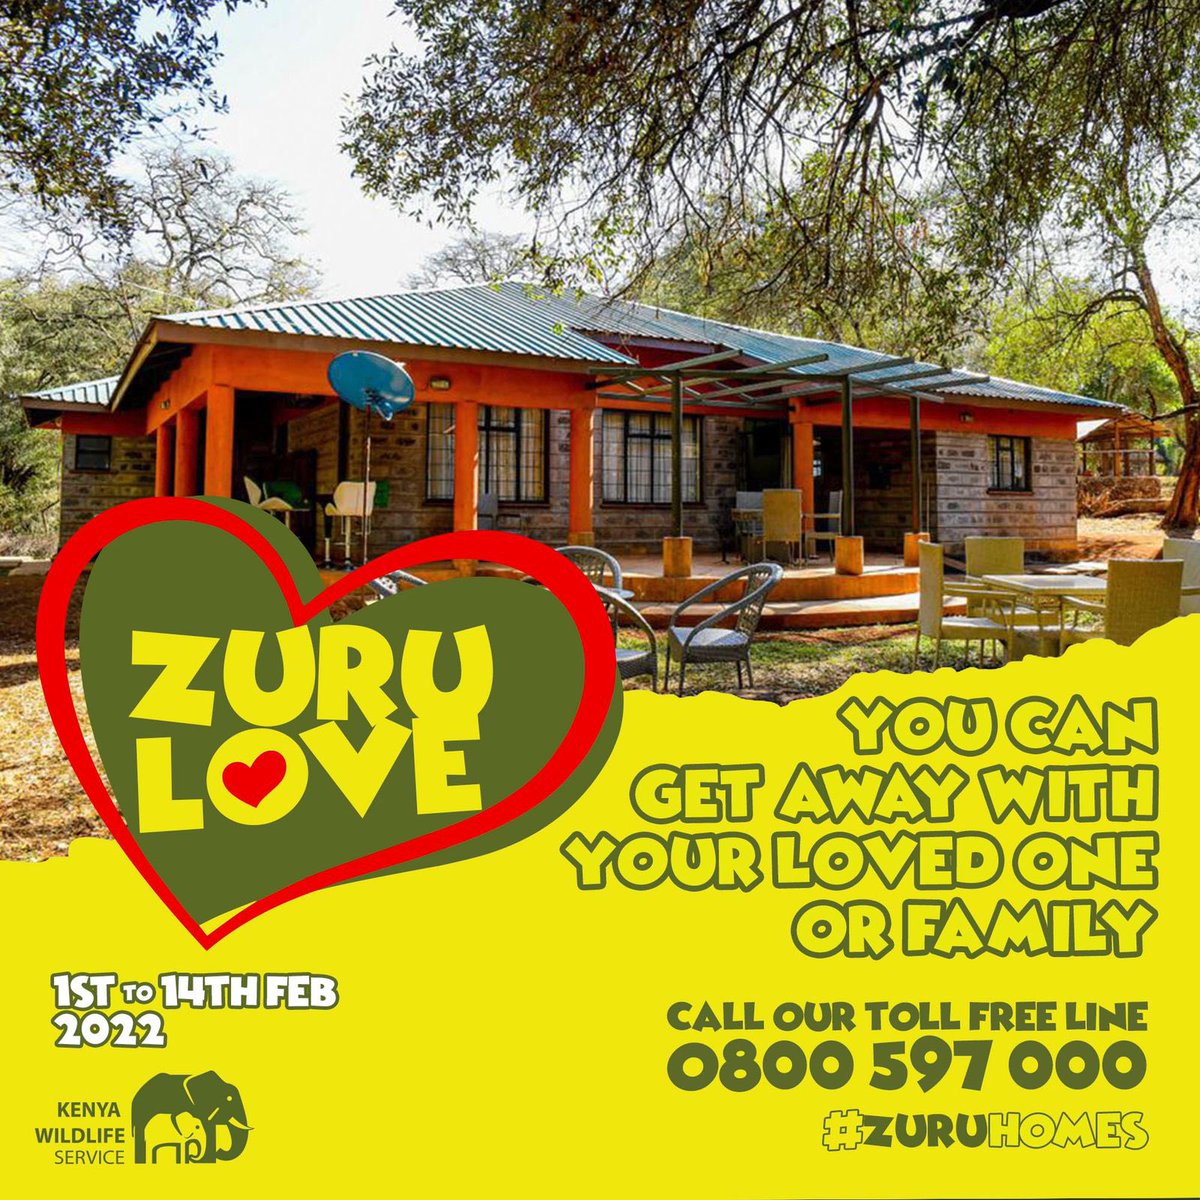 Get away with your loved one to the parks and enjoy your love! #ValentinesInThePark
#ZuruLove